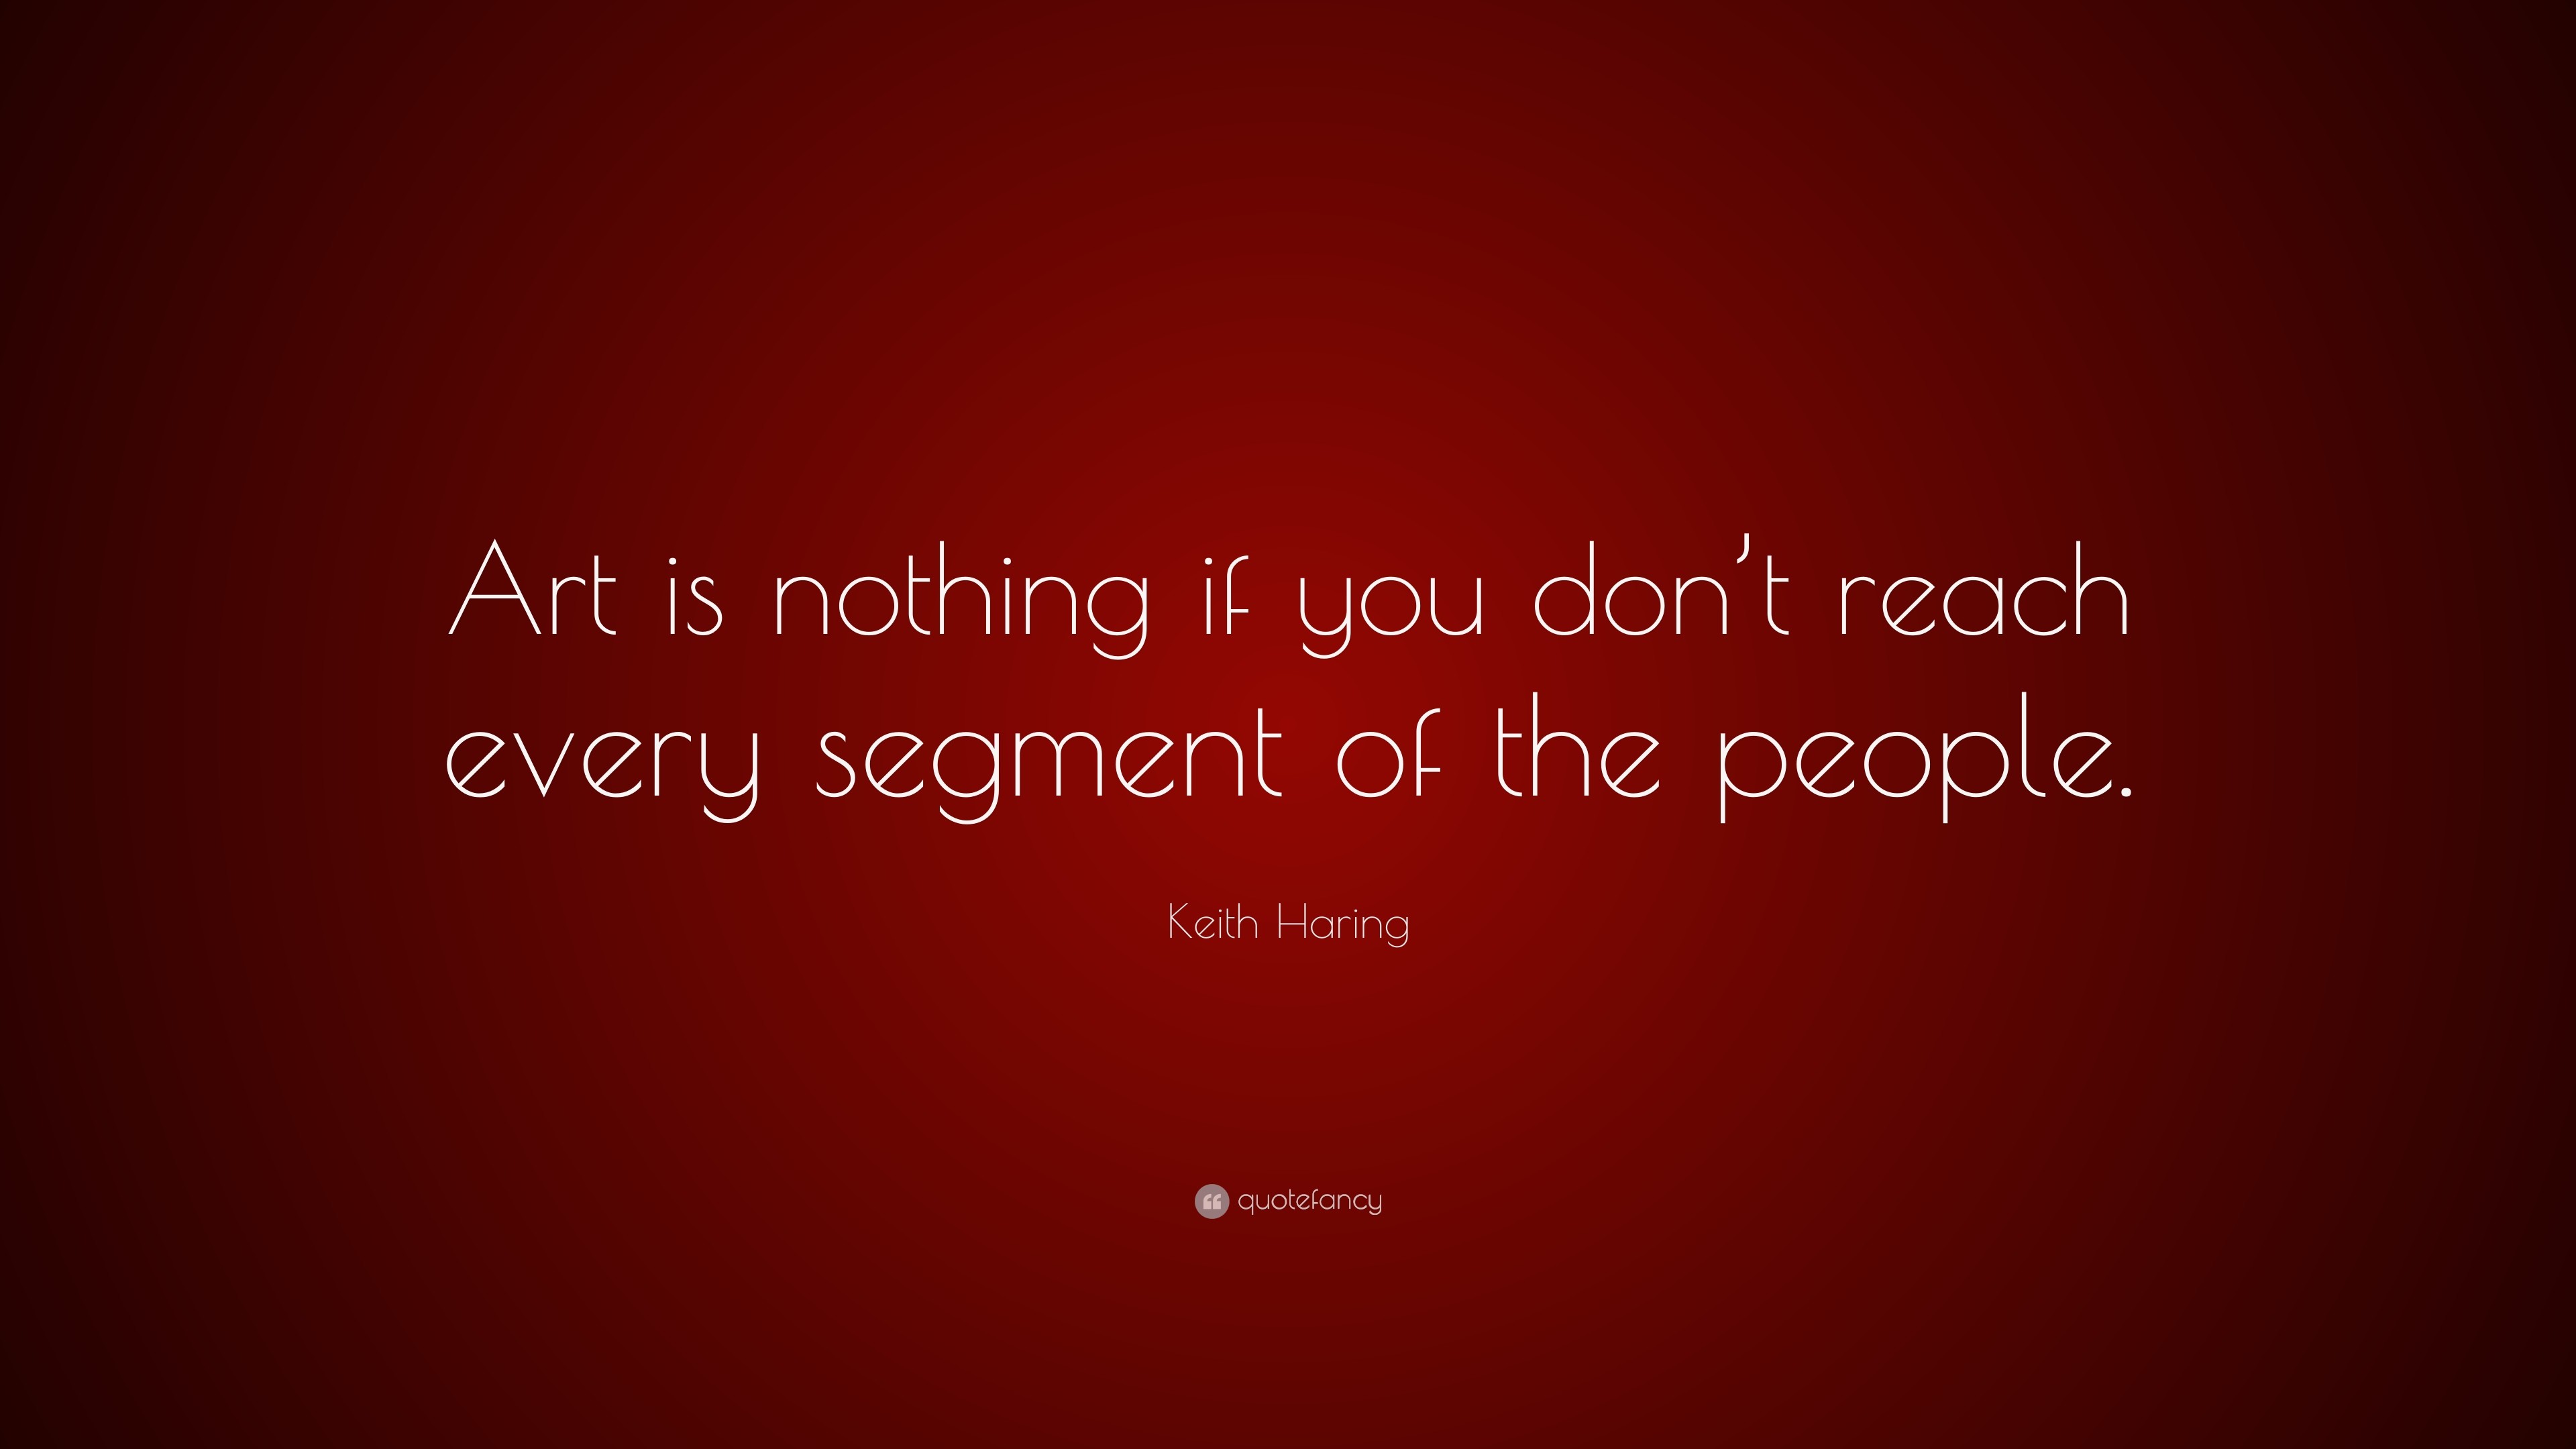 3840x2160 Keith Haring Quote: “Art is nothing if you don't reach every segment